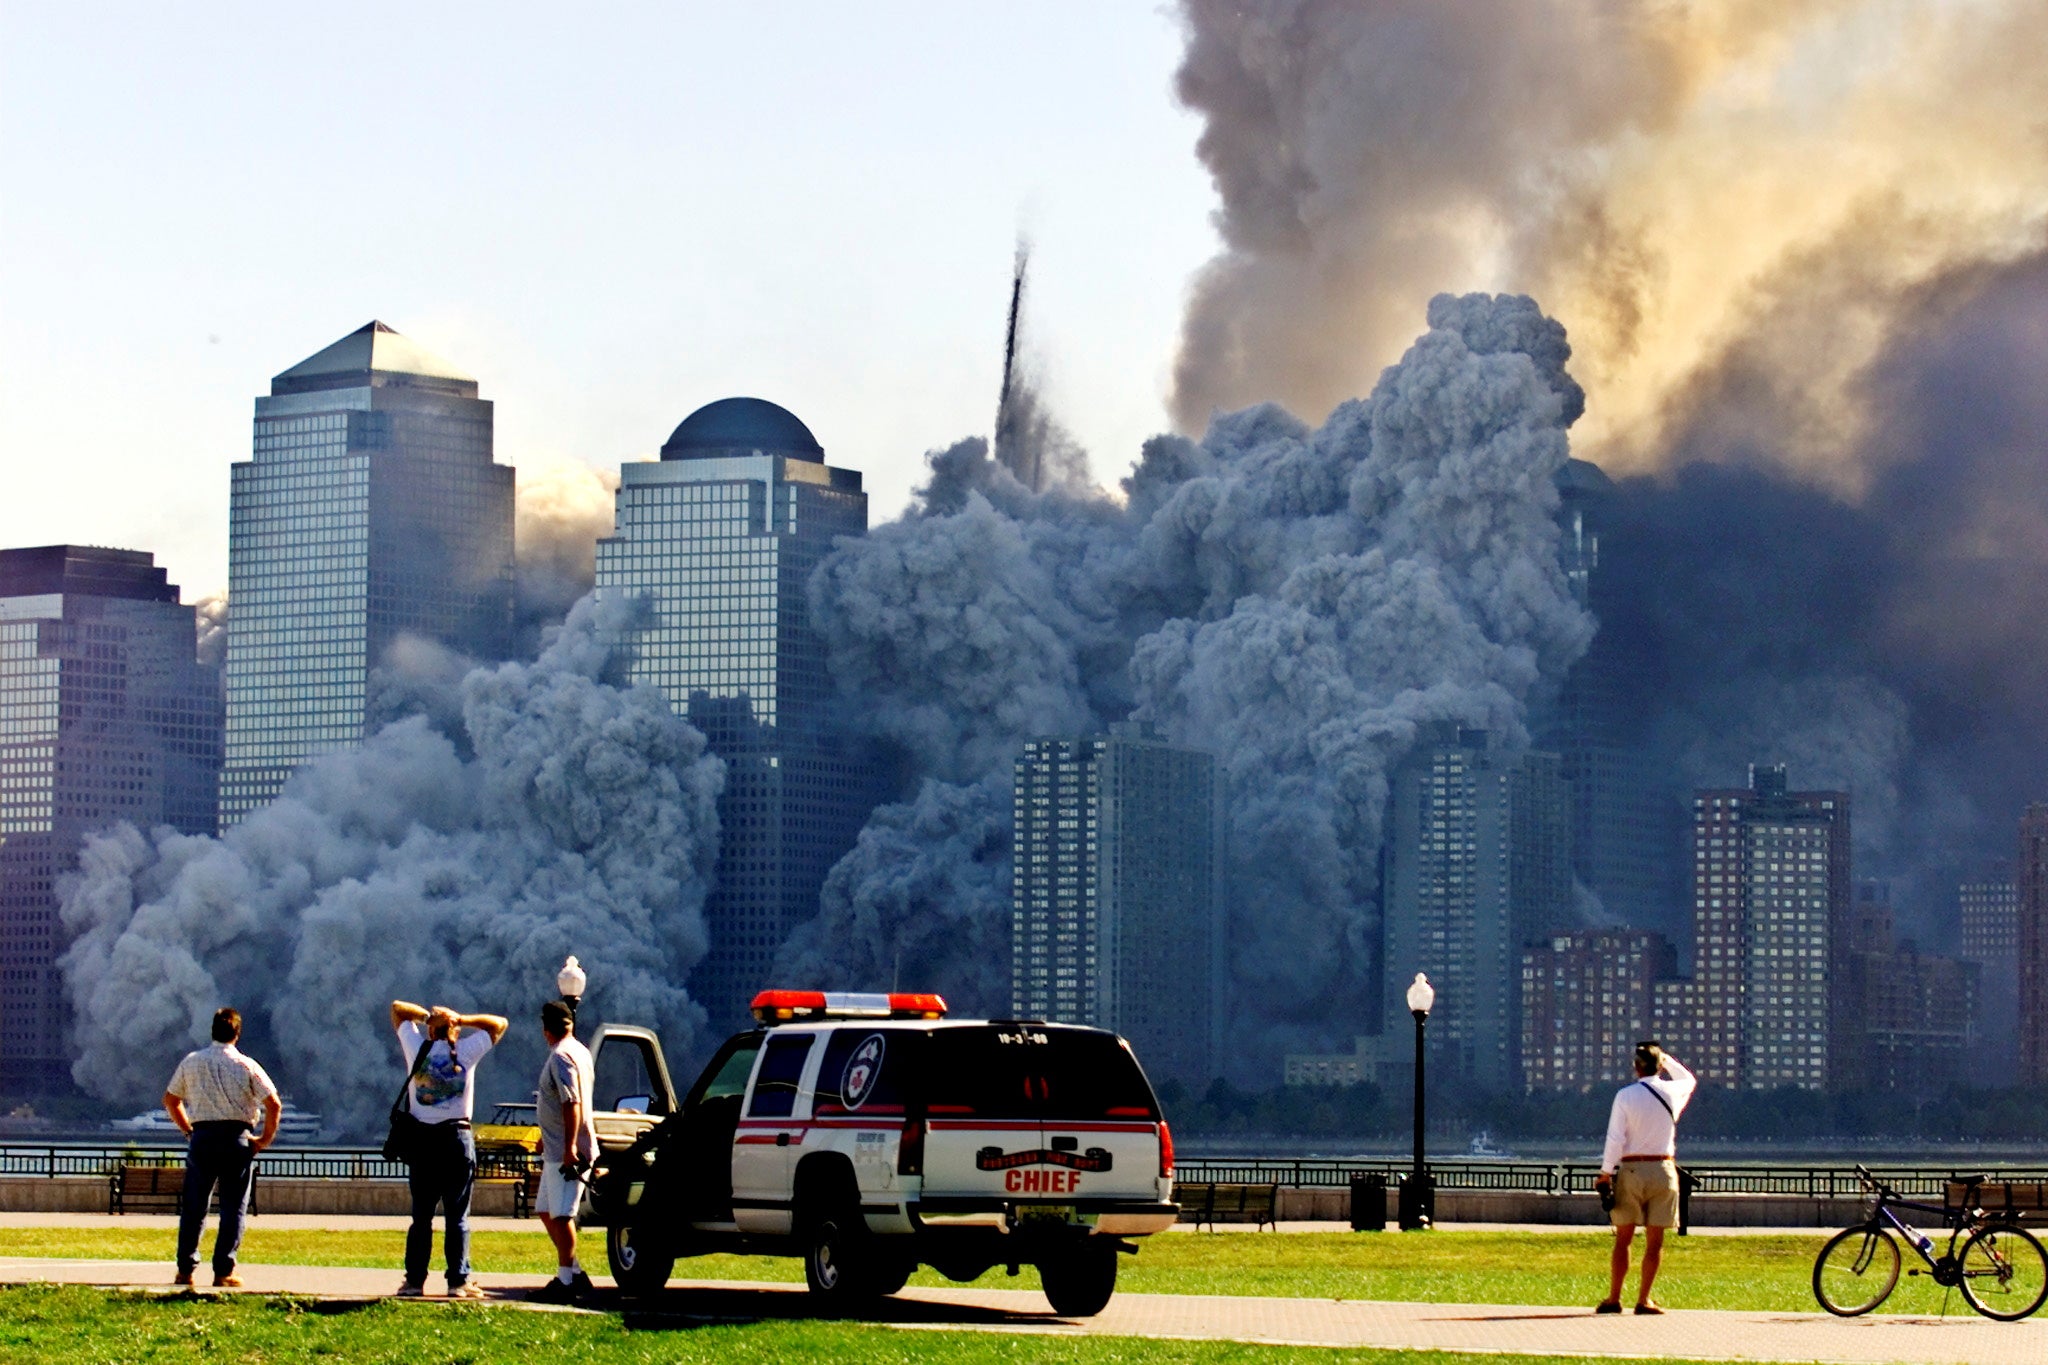 Tower 2 dissolves in a cloud of dust and debris about half an hour after the first Twin Tower collapsed